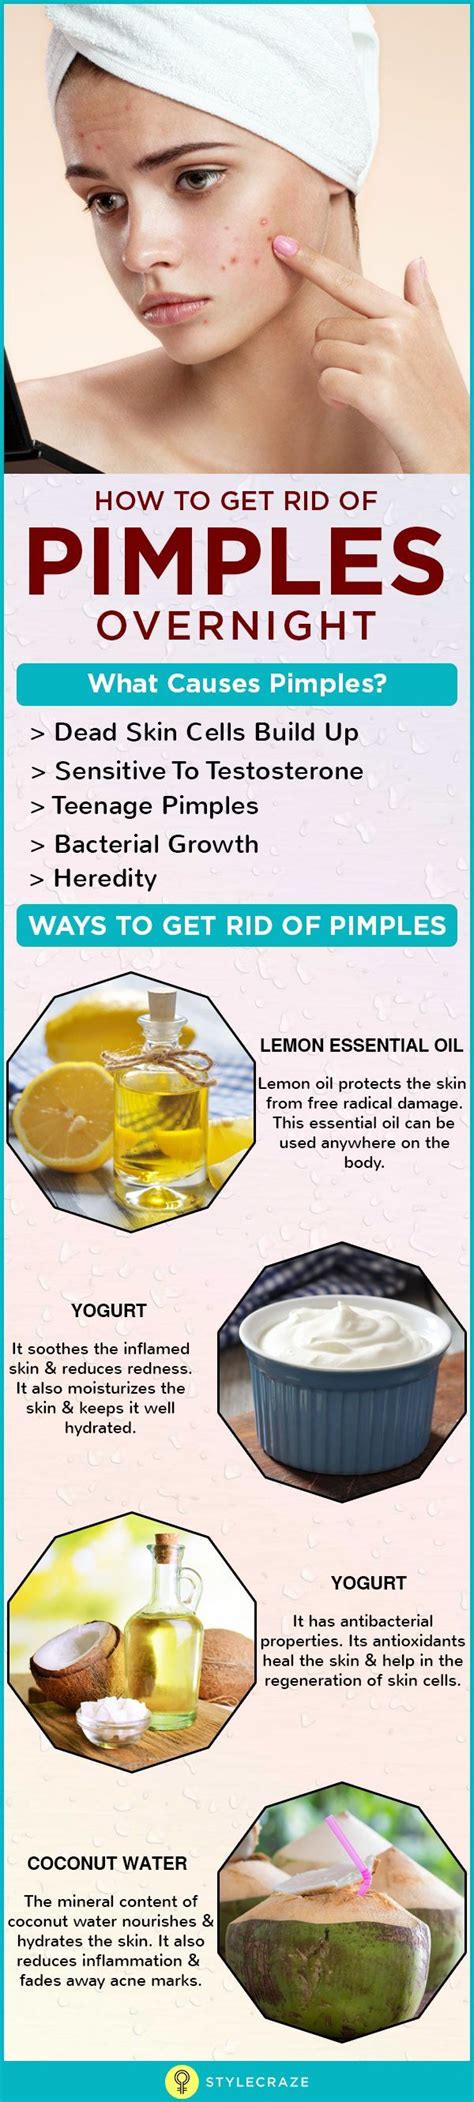 how to get rid of pimples acne overnight fast are pimples